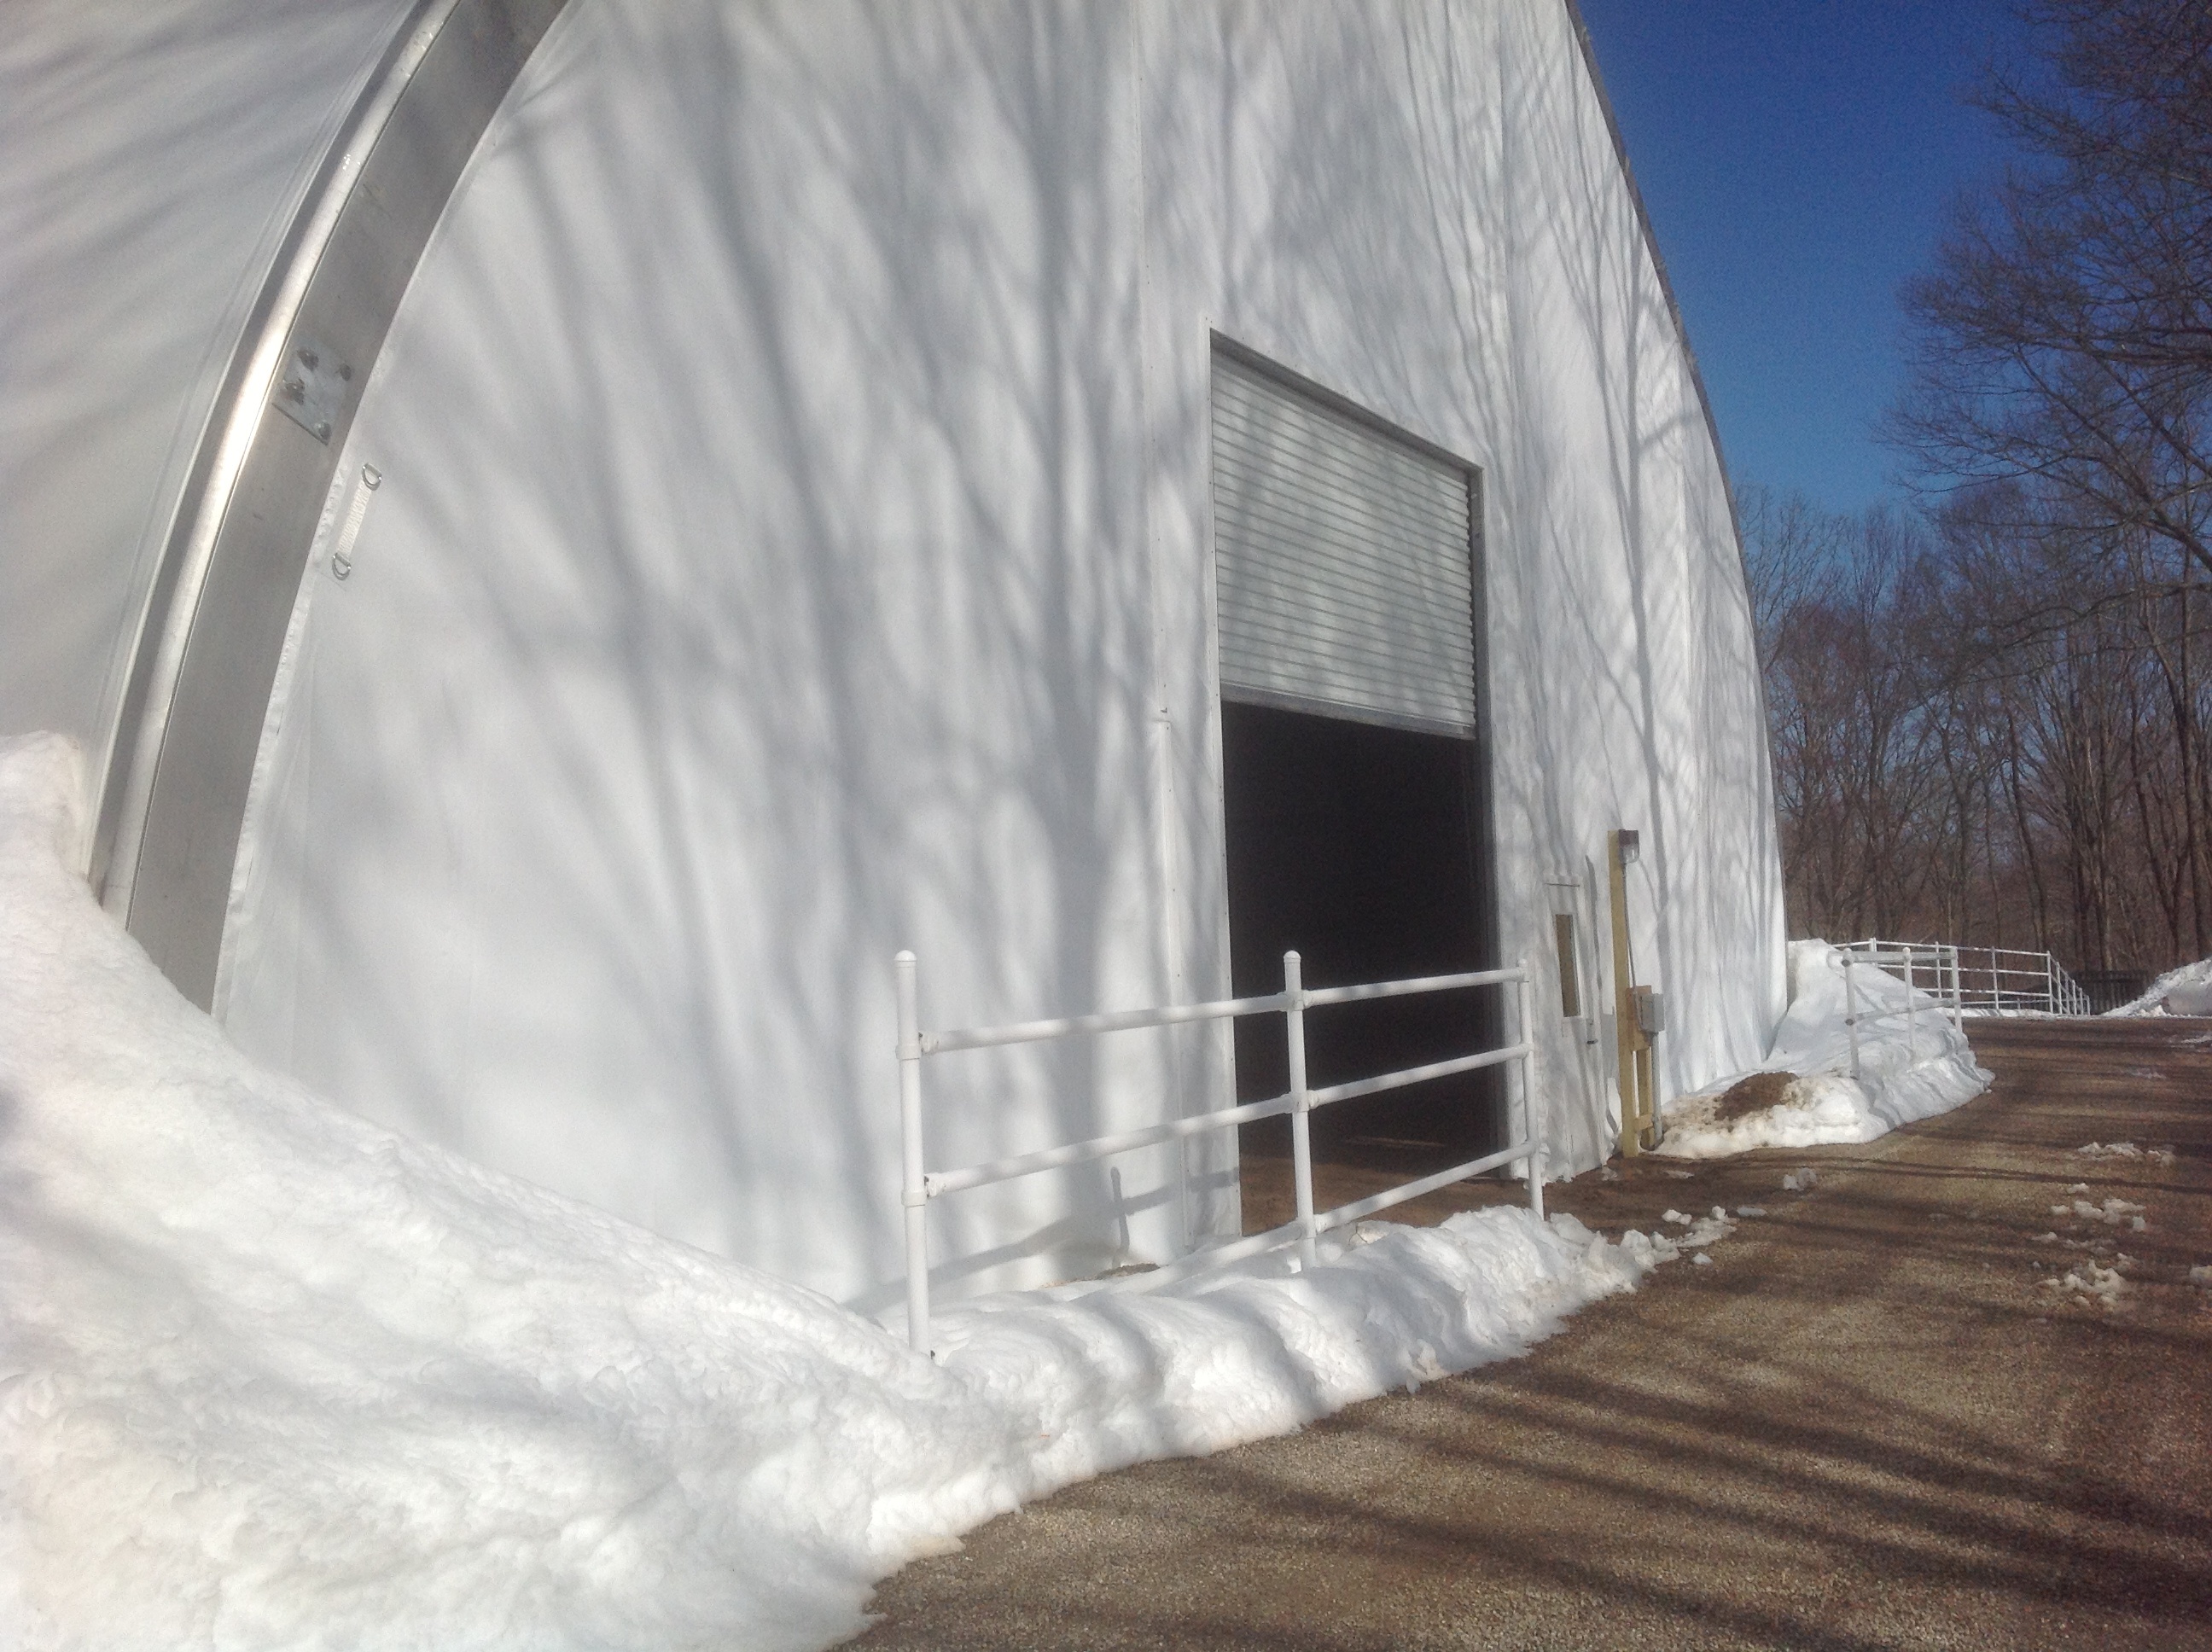 Mahaffey Tensions Series (MTS™) Structure is a Great Solution to Extreme Weather, such as snow.